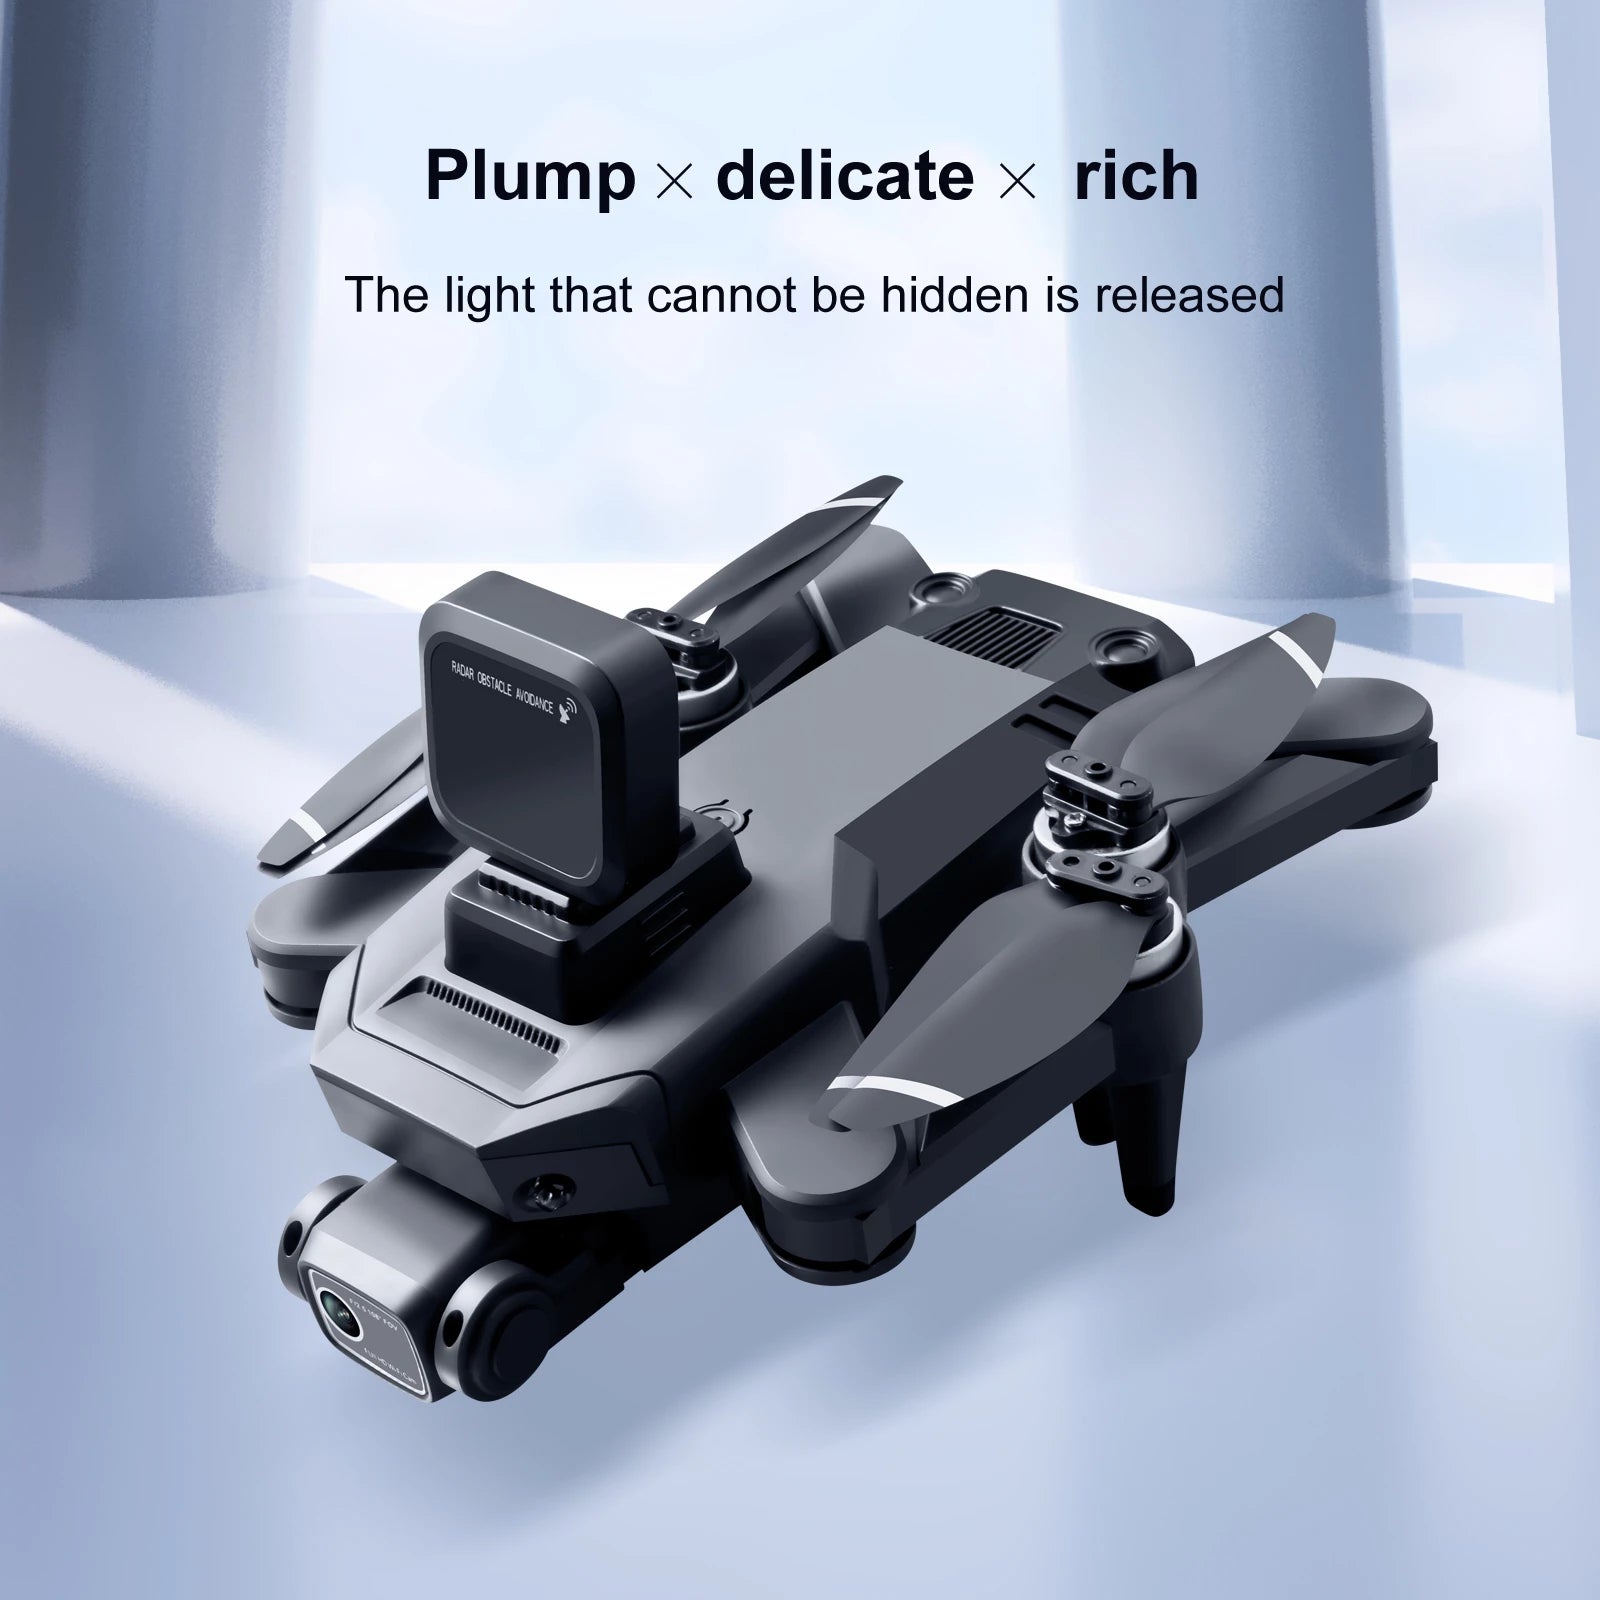 S109 GPS Drone, Plump delicate rich The light that cannot be hidden is released PUdur A tEst